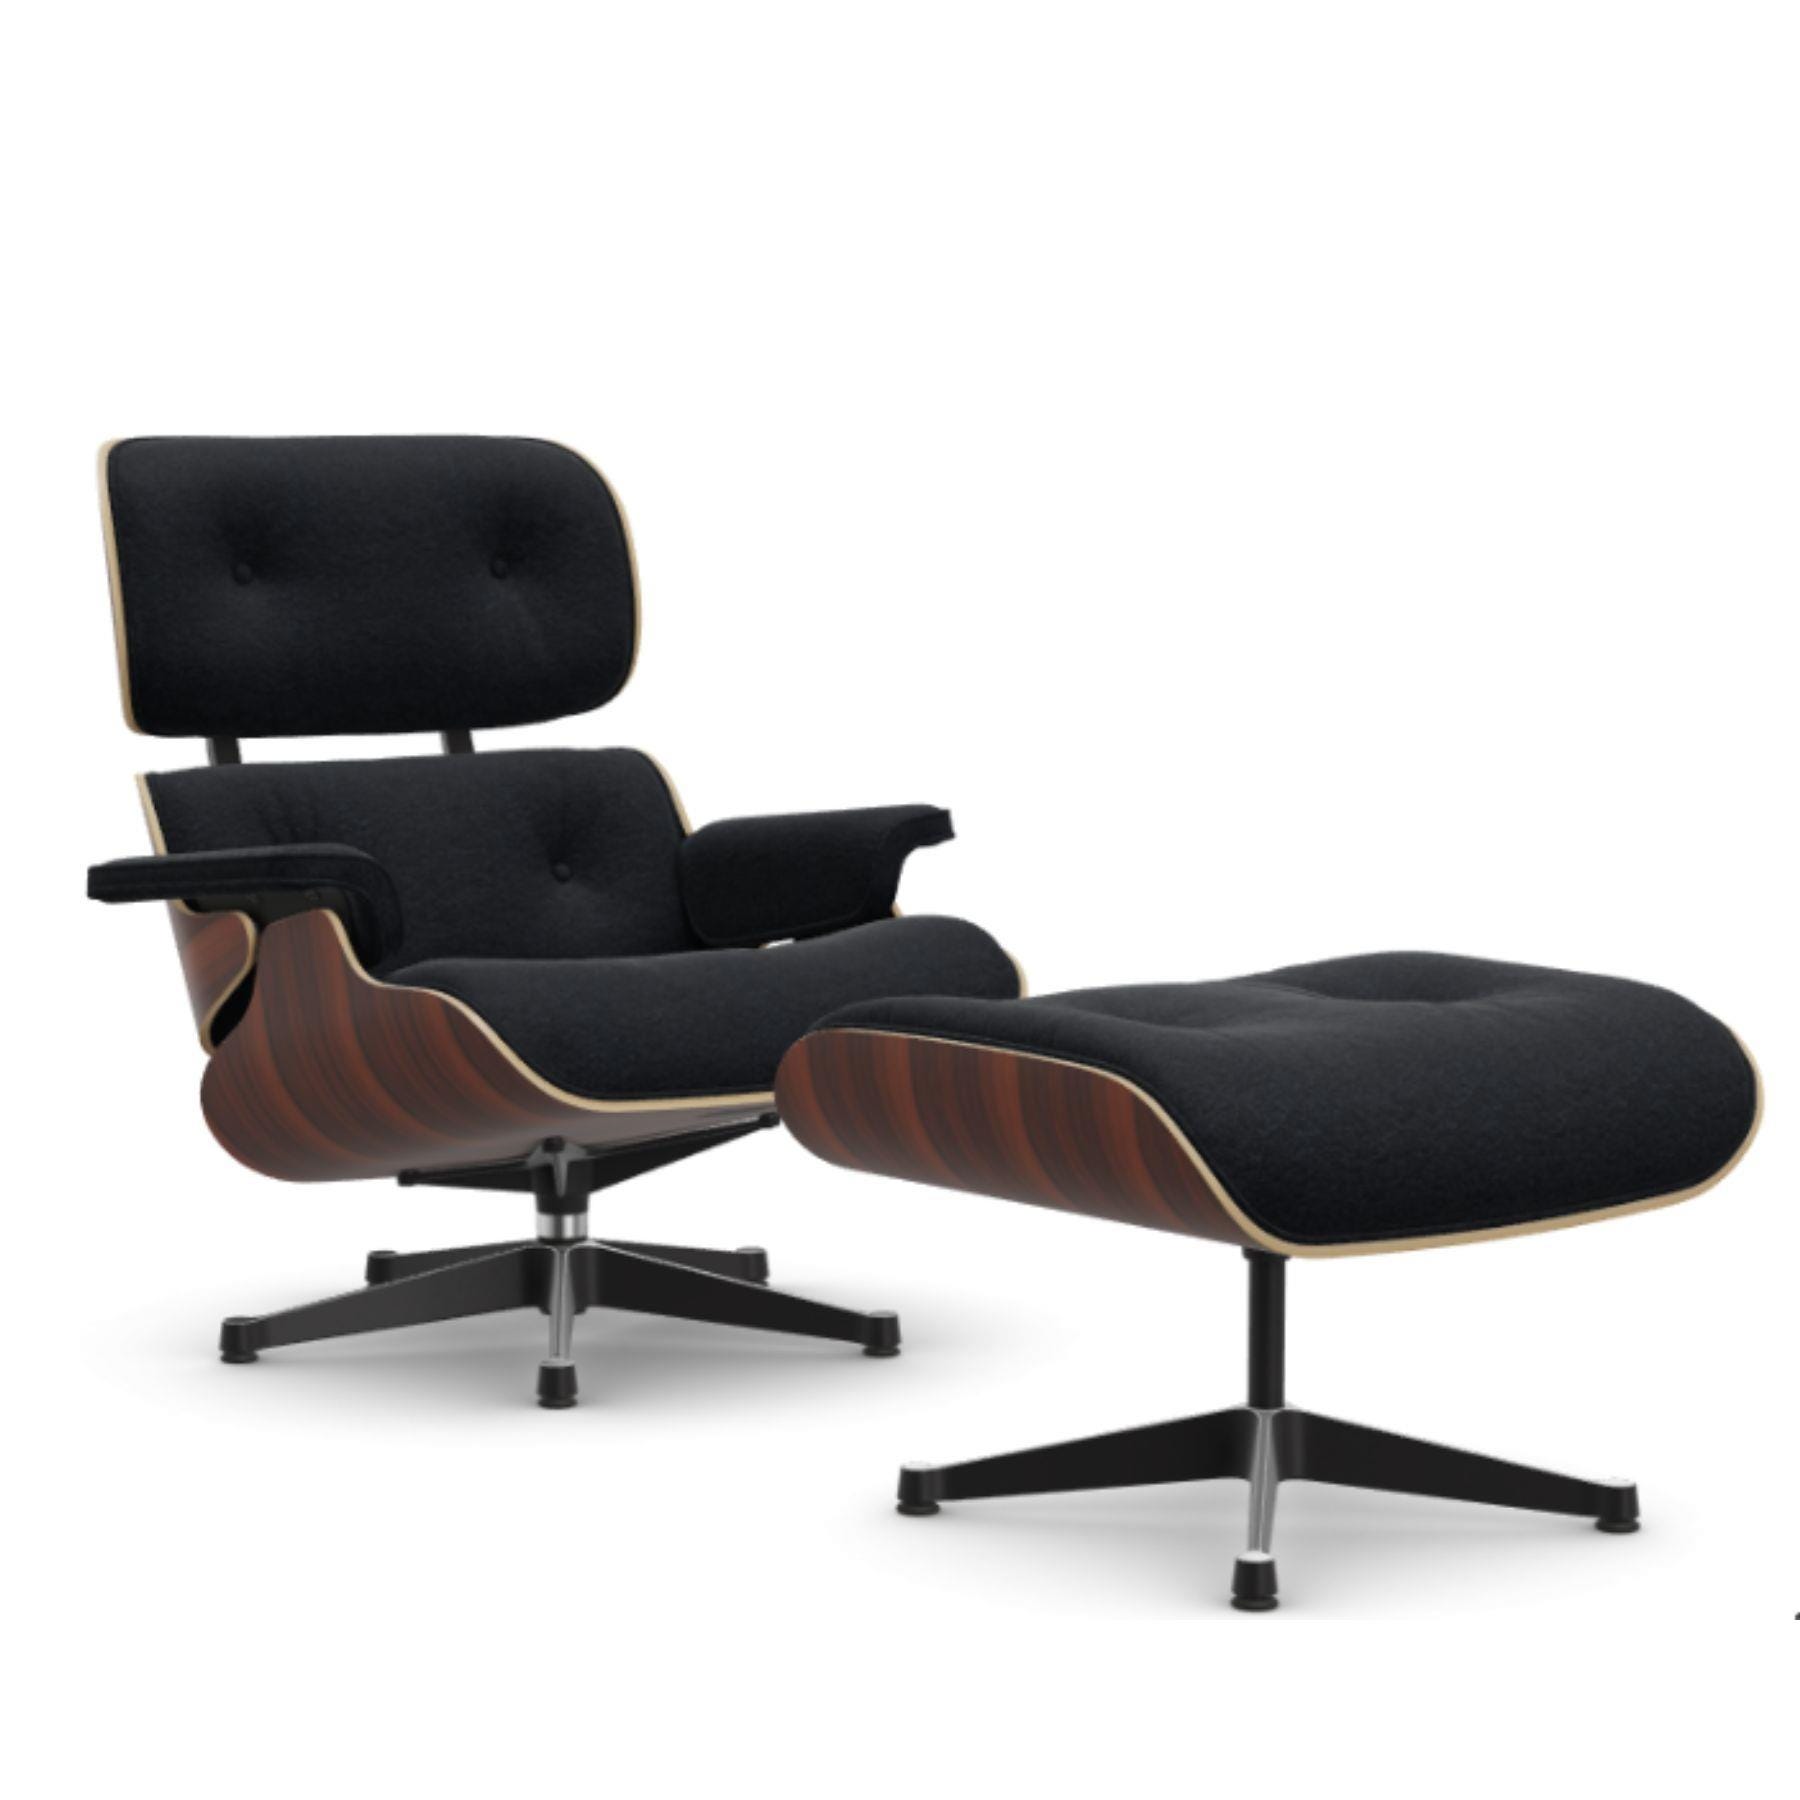 Vitra Eames Lounge Chair Santos Palisander Nubia Black Anthracite Polished Black With Ottoman Light Wood Designer Furniture From Holloways Of Ludl